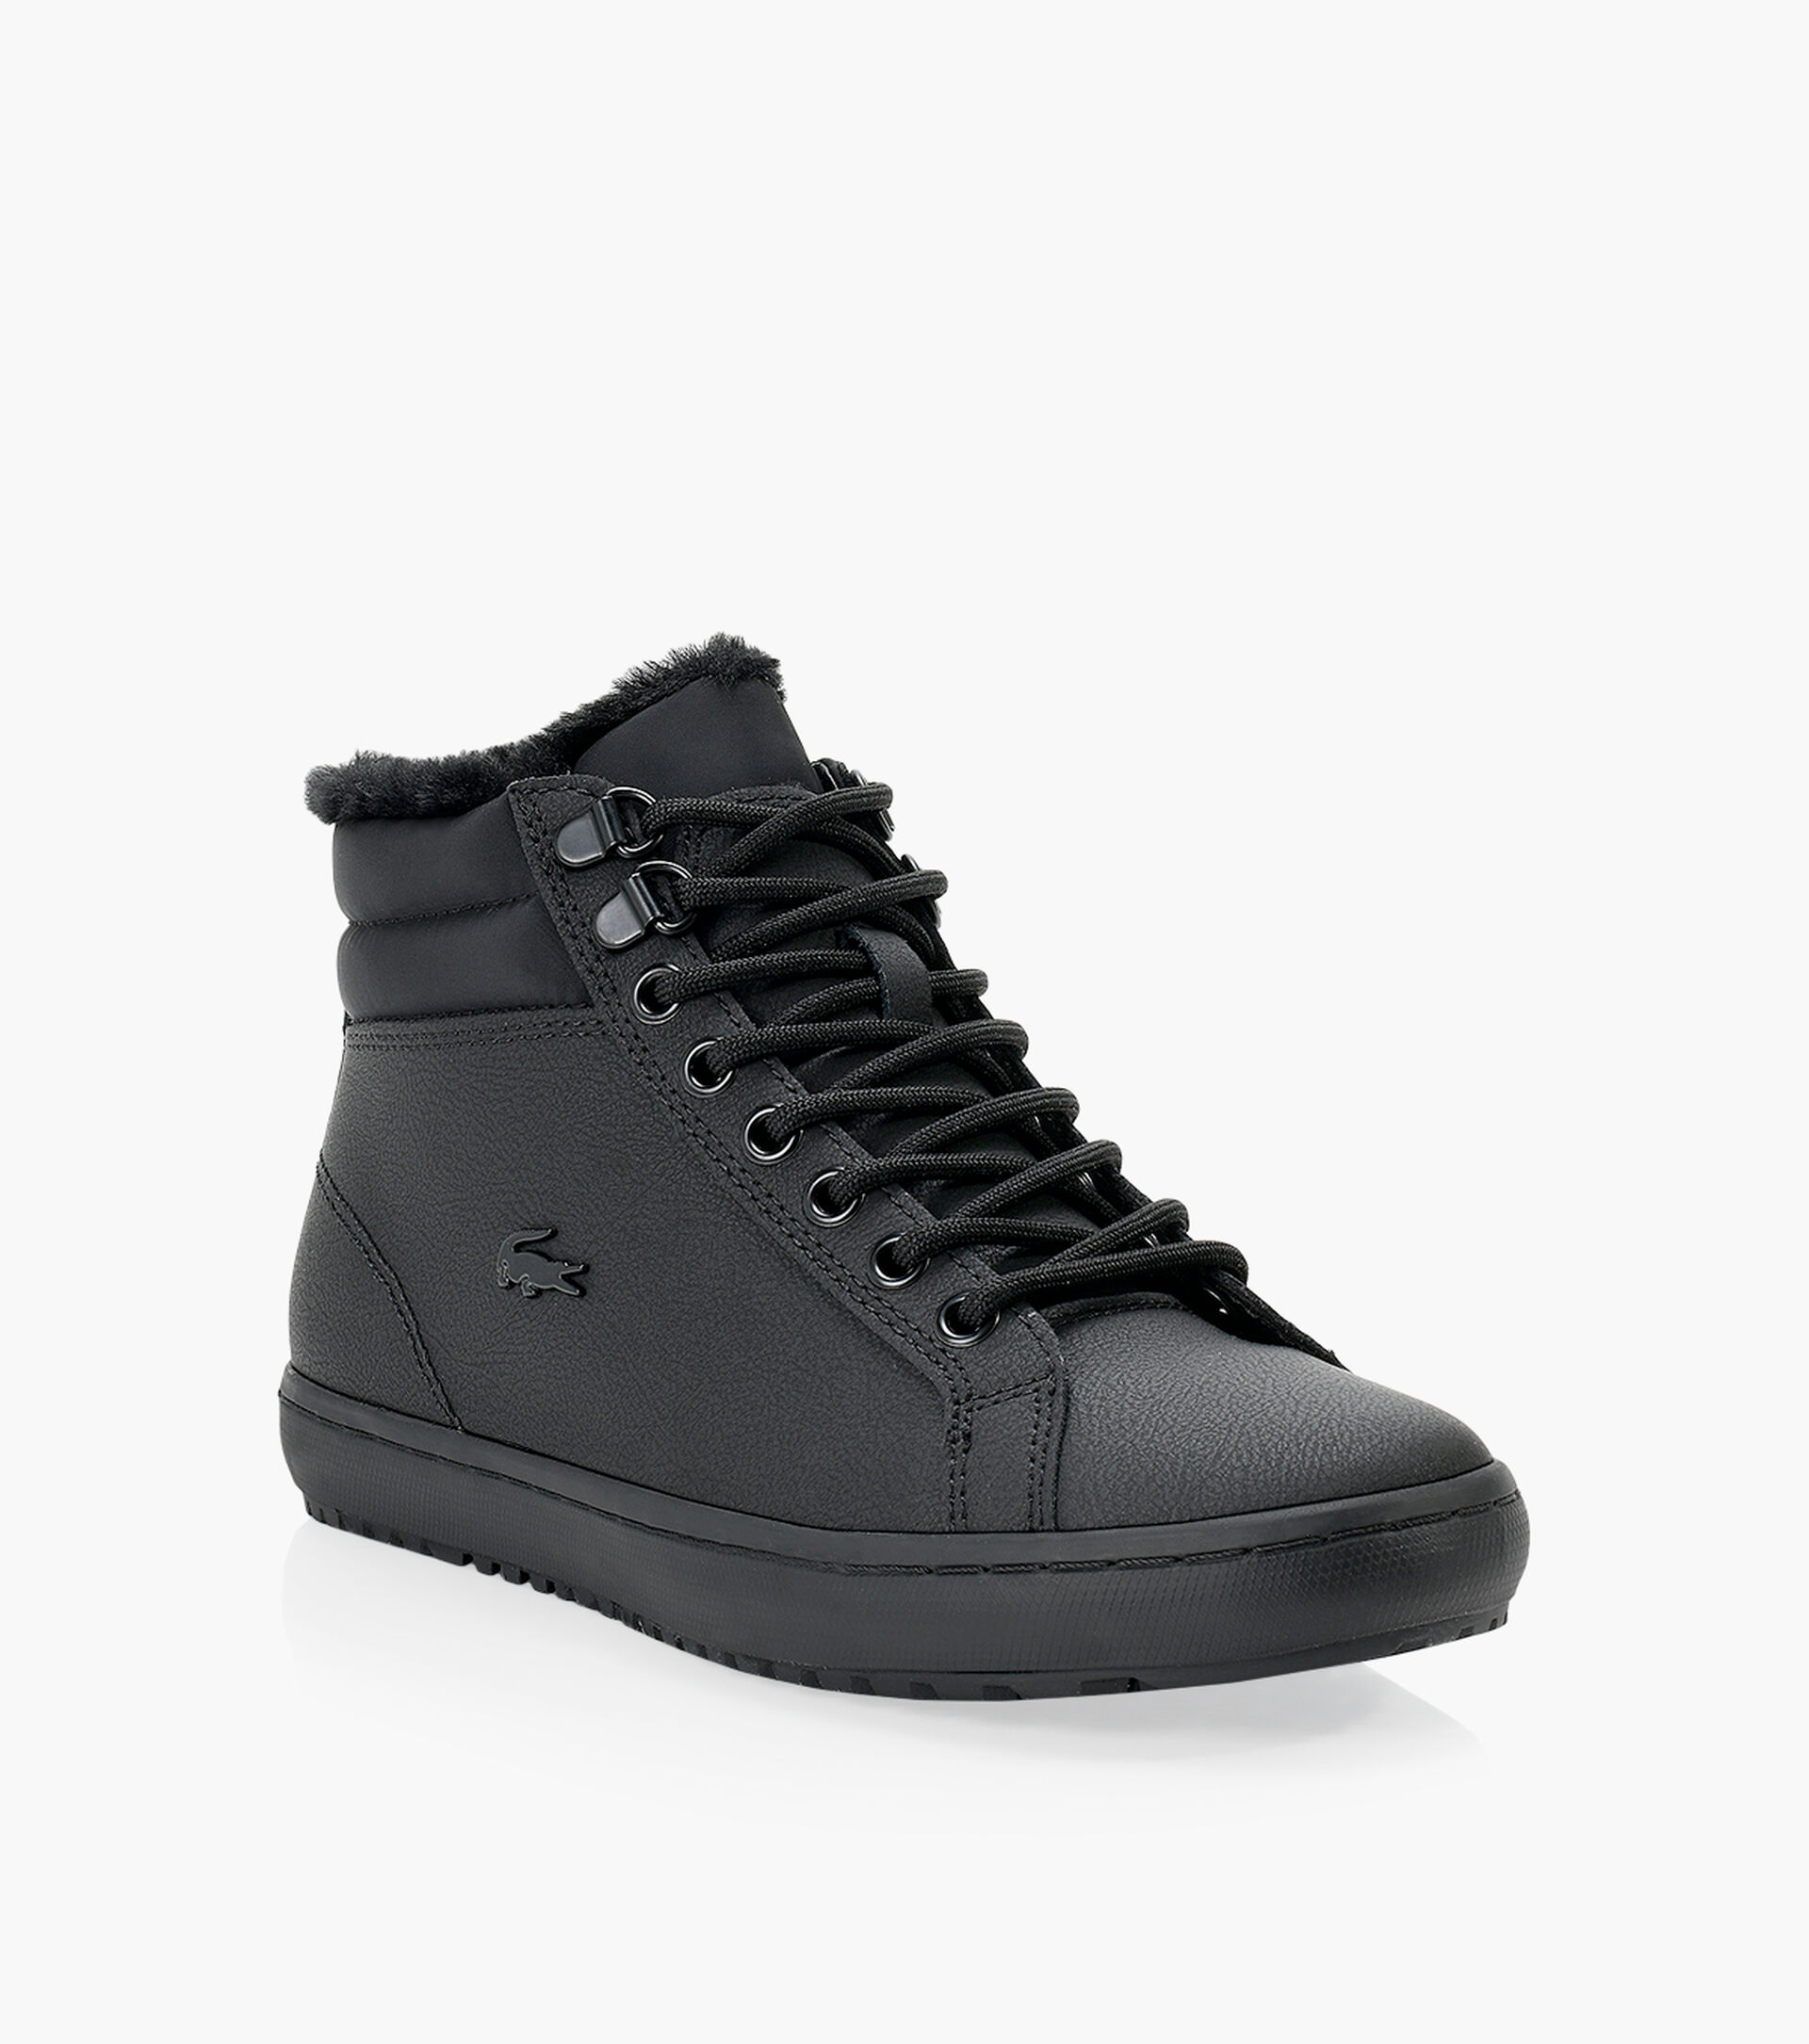 LACOSTE THERMO 419 1 - Black | Browns